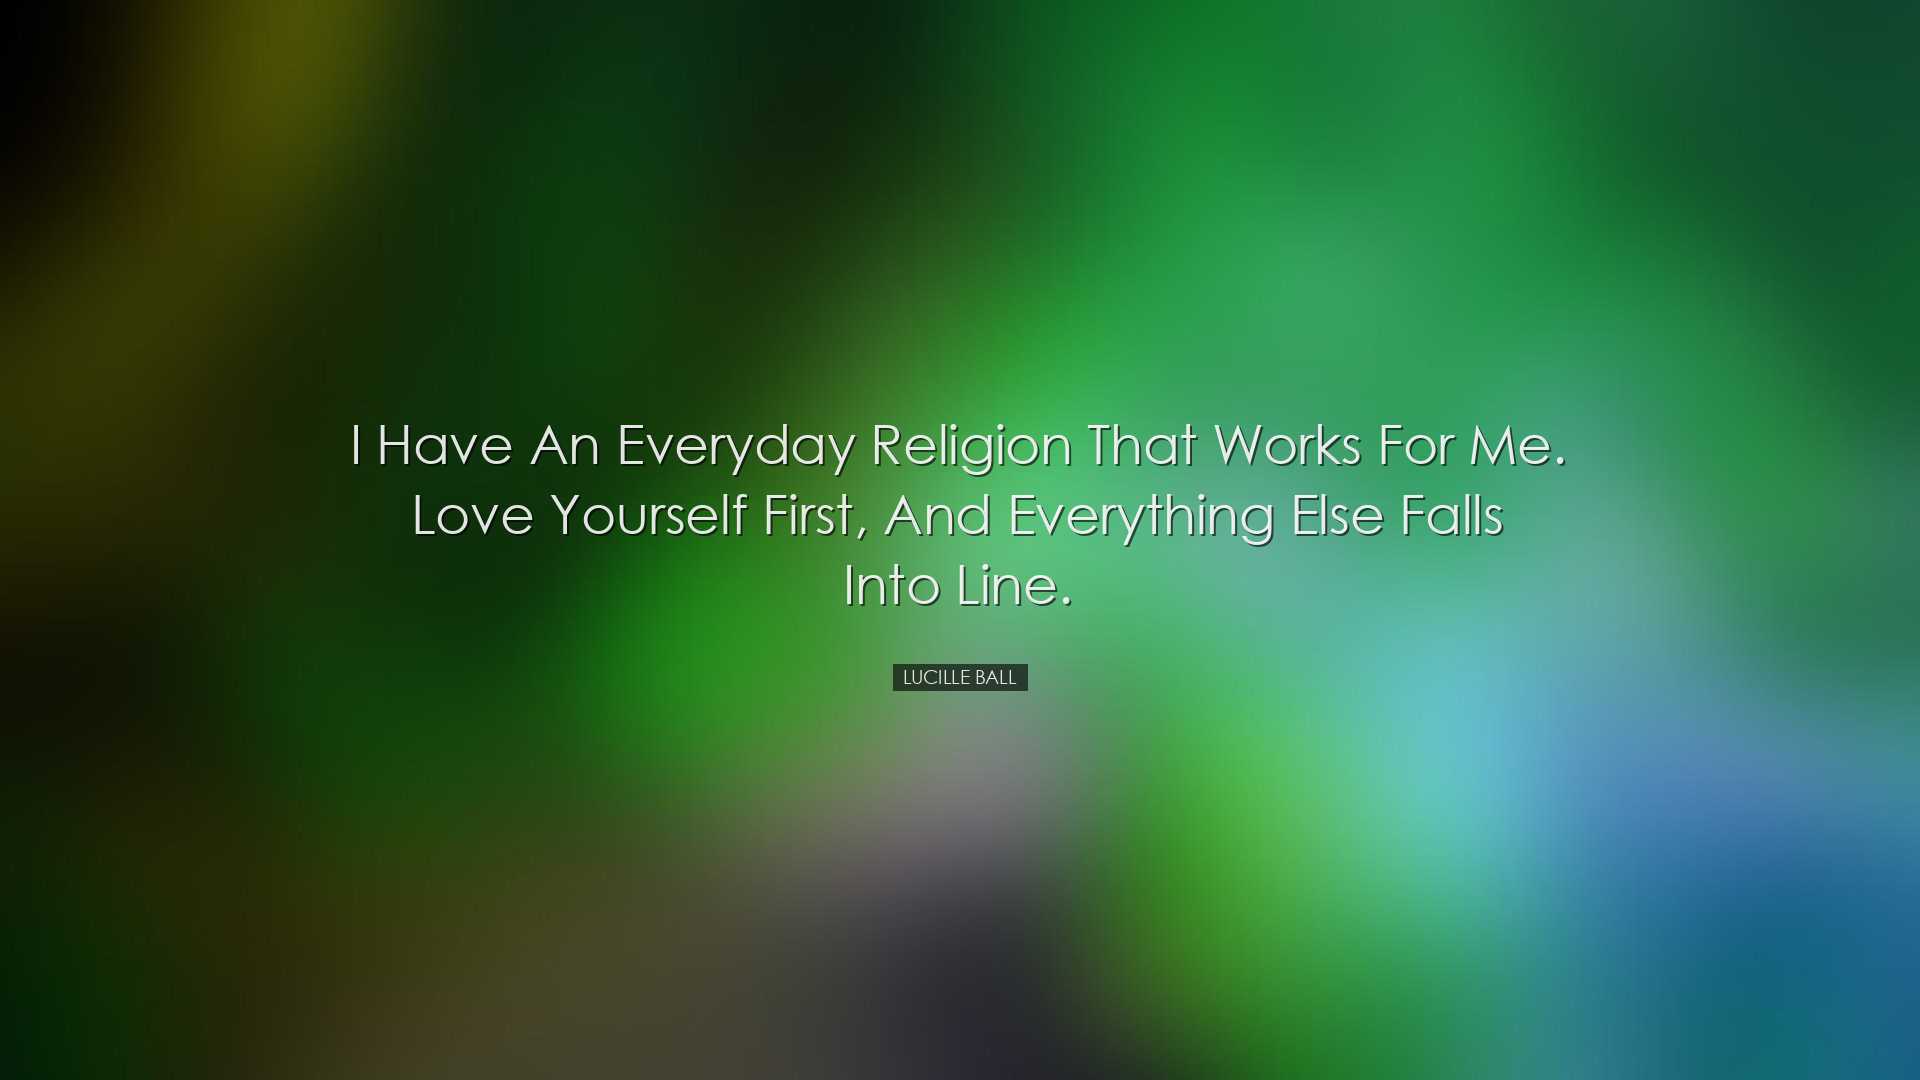 I have an everyday religion that works for me. Love yourself first